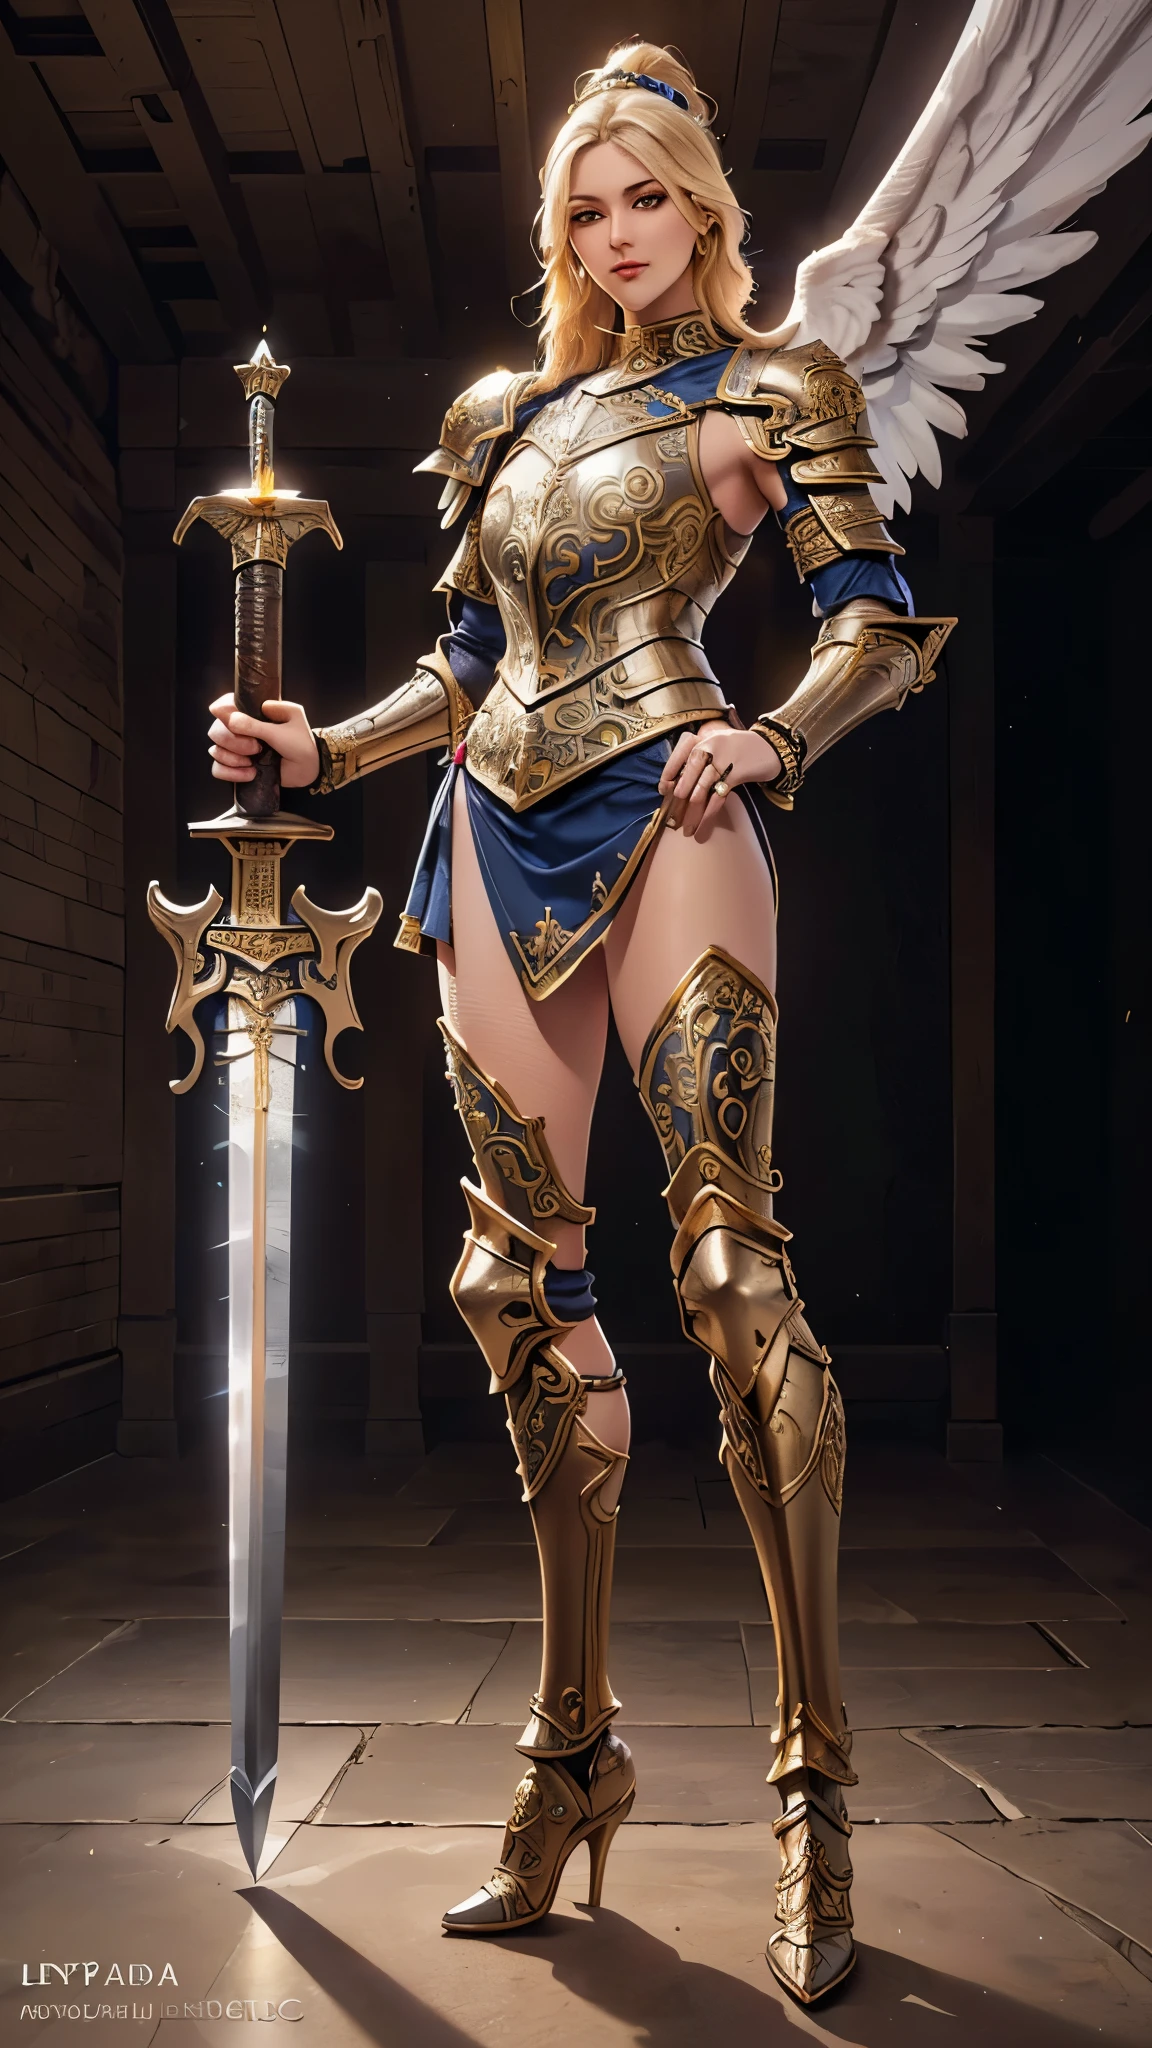 (5 Female Knights:1.3), armor girl, gorgeous female paladin, Bikini Armor Female Knight, Beautiful Female Knight, The Girl in the Knight's Armor, Female Paladin, Beautiful Female Knight,(full body shots:1.8), (full-body standing image:1.8), valkyrie, (Frontal shots:1.2), MEDIEVAL ARMOR, KNIGHT TEMPLARY WOMAN,  skirt ARMOR, (full-body standing image:1.8), (upper body up:0.3), (hyper realistic:1.4), (realistic:1.3), (best quality real texture skin), (The Celestial Warrior Angel of the Lord: 1.6), (Holds the hilt of a sacred straight sword with elaborate decoration that emits a mysterious glow: 1.9), (finely detailed true circle Symmetrical eyes), (finely drawn beautiful face), (Angel ring of divine radiance floating overhead: 1.8), ((medieval world)), (Full-body armor with delicate decorations that gives off a divine shine:1.8,  (hyper-realistic lifelike texture:1.4)
